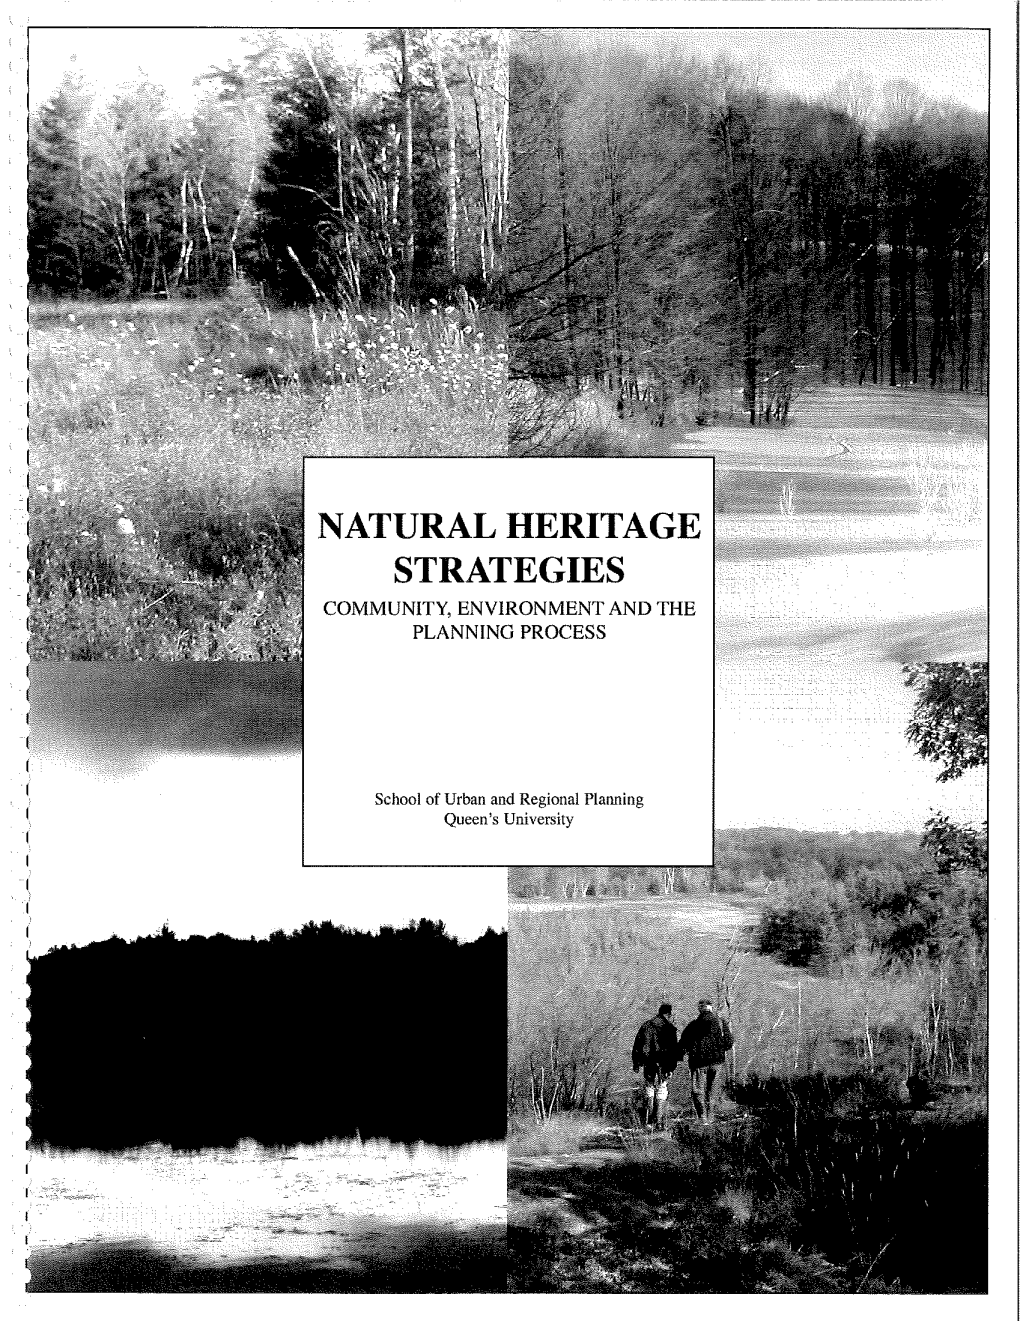 Natural Heritage Strategies Community, Environment and the Planning Process